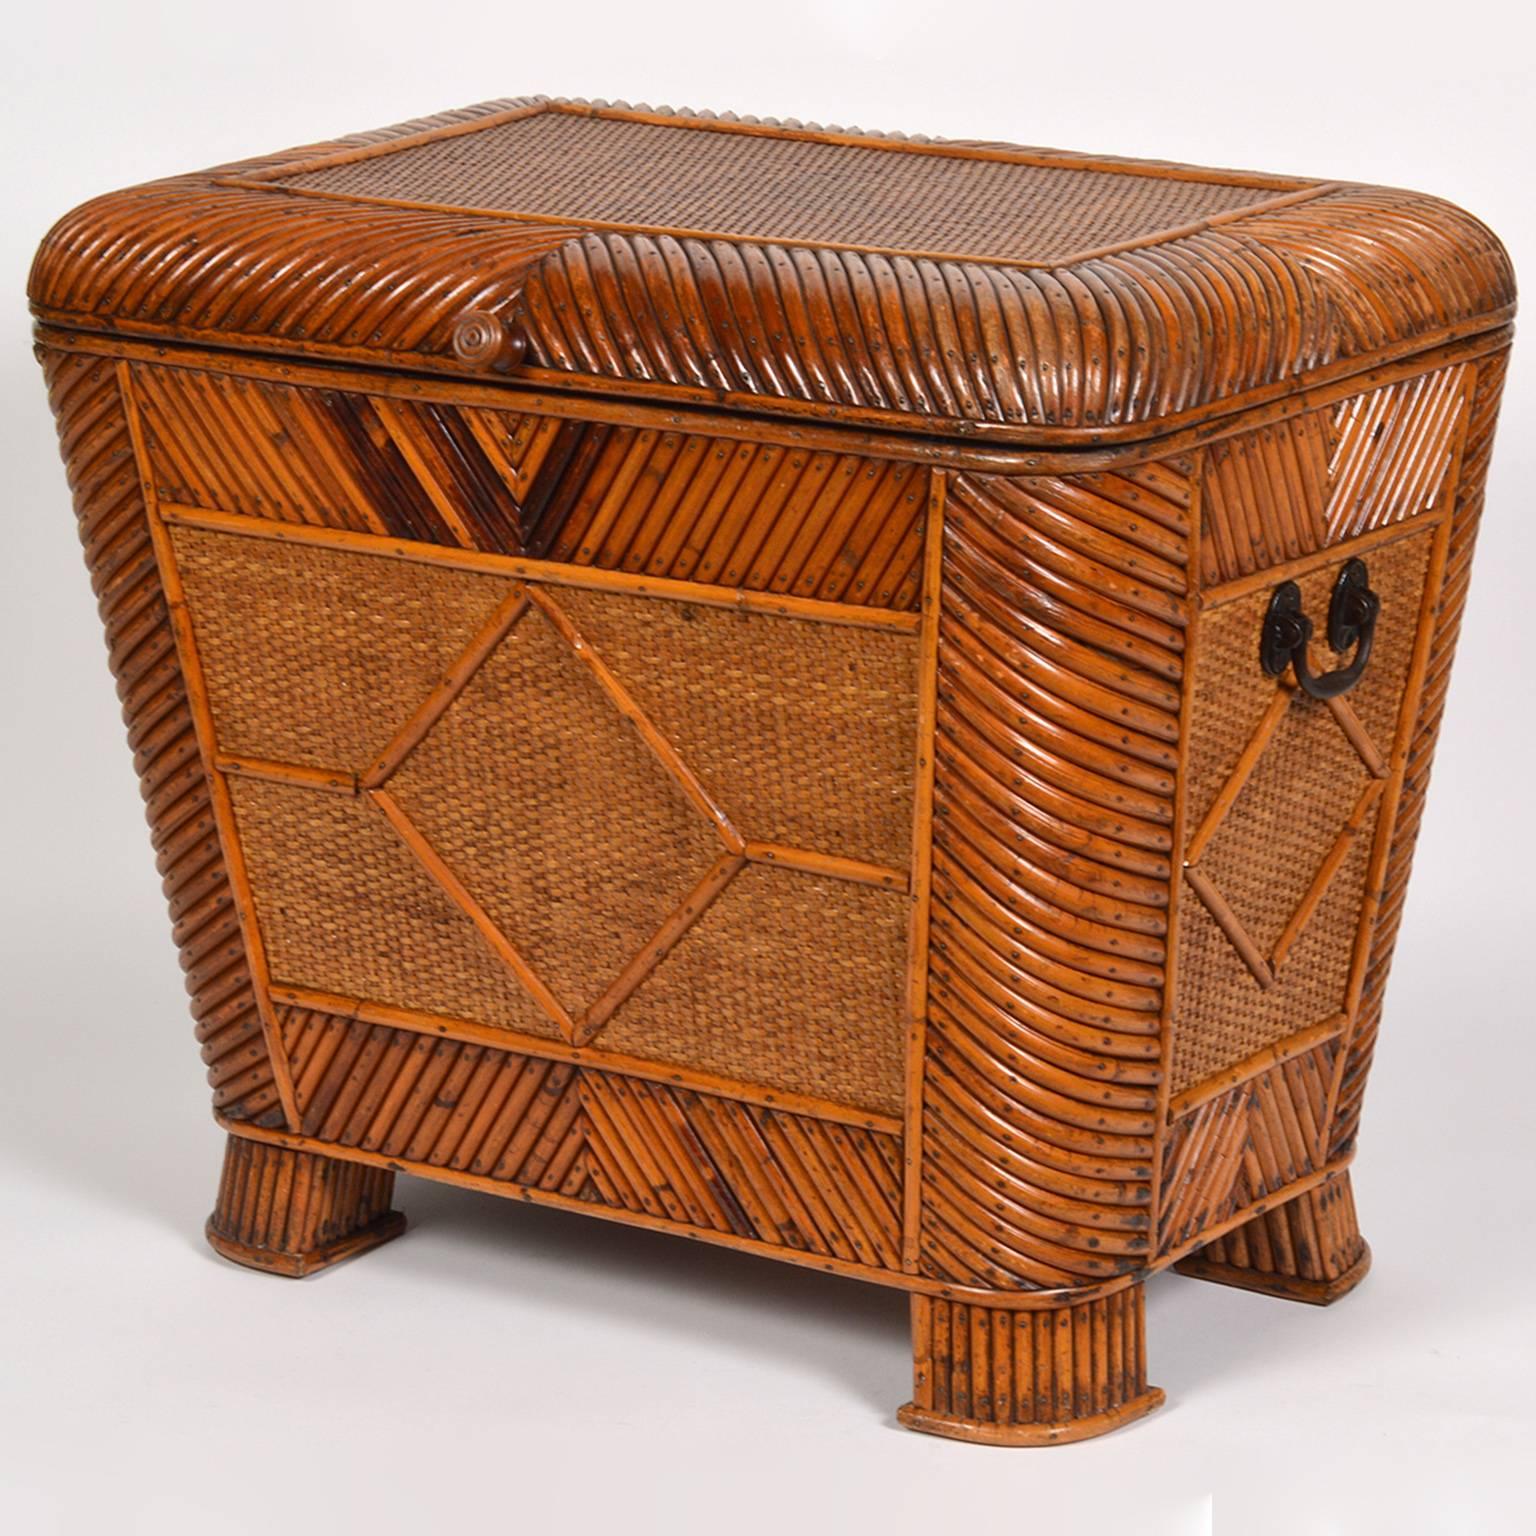 Standing 19 inches tall this charming and delicately detailed box can also serve as an exotic side table. The bamboo is applied to a wooden frame in changing diagonal patterns framing panels of raffia weave. The box is finished on all four sides and